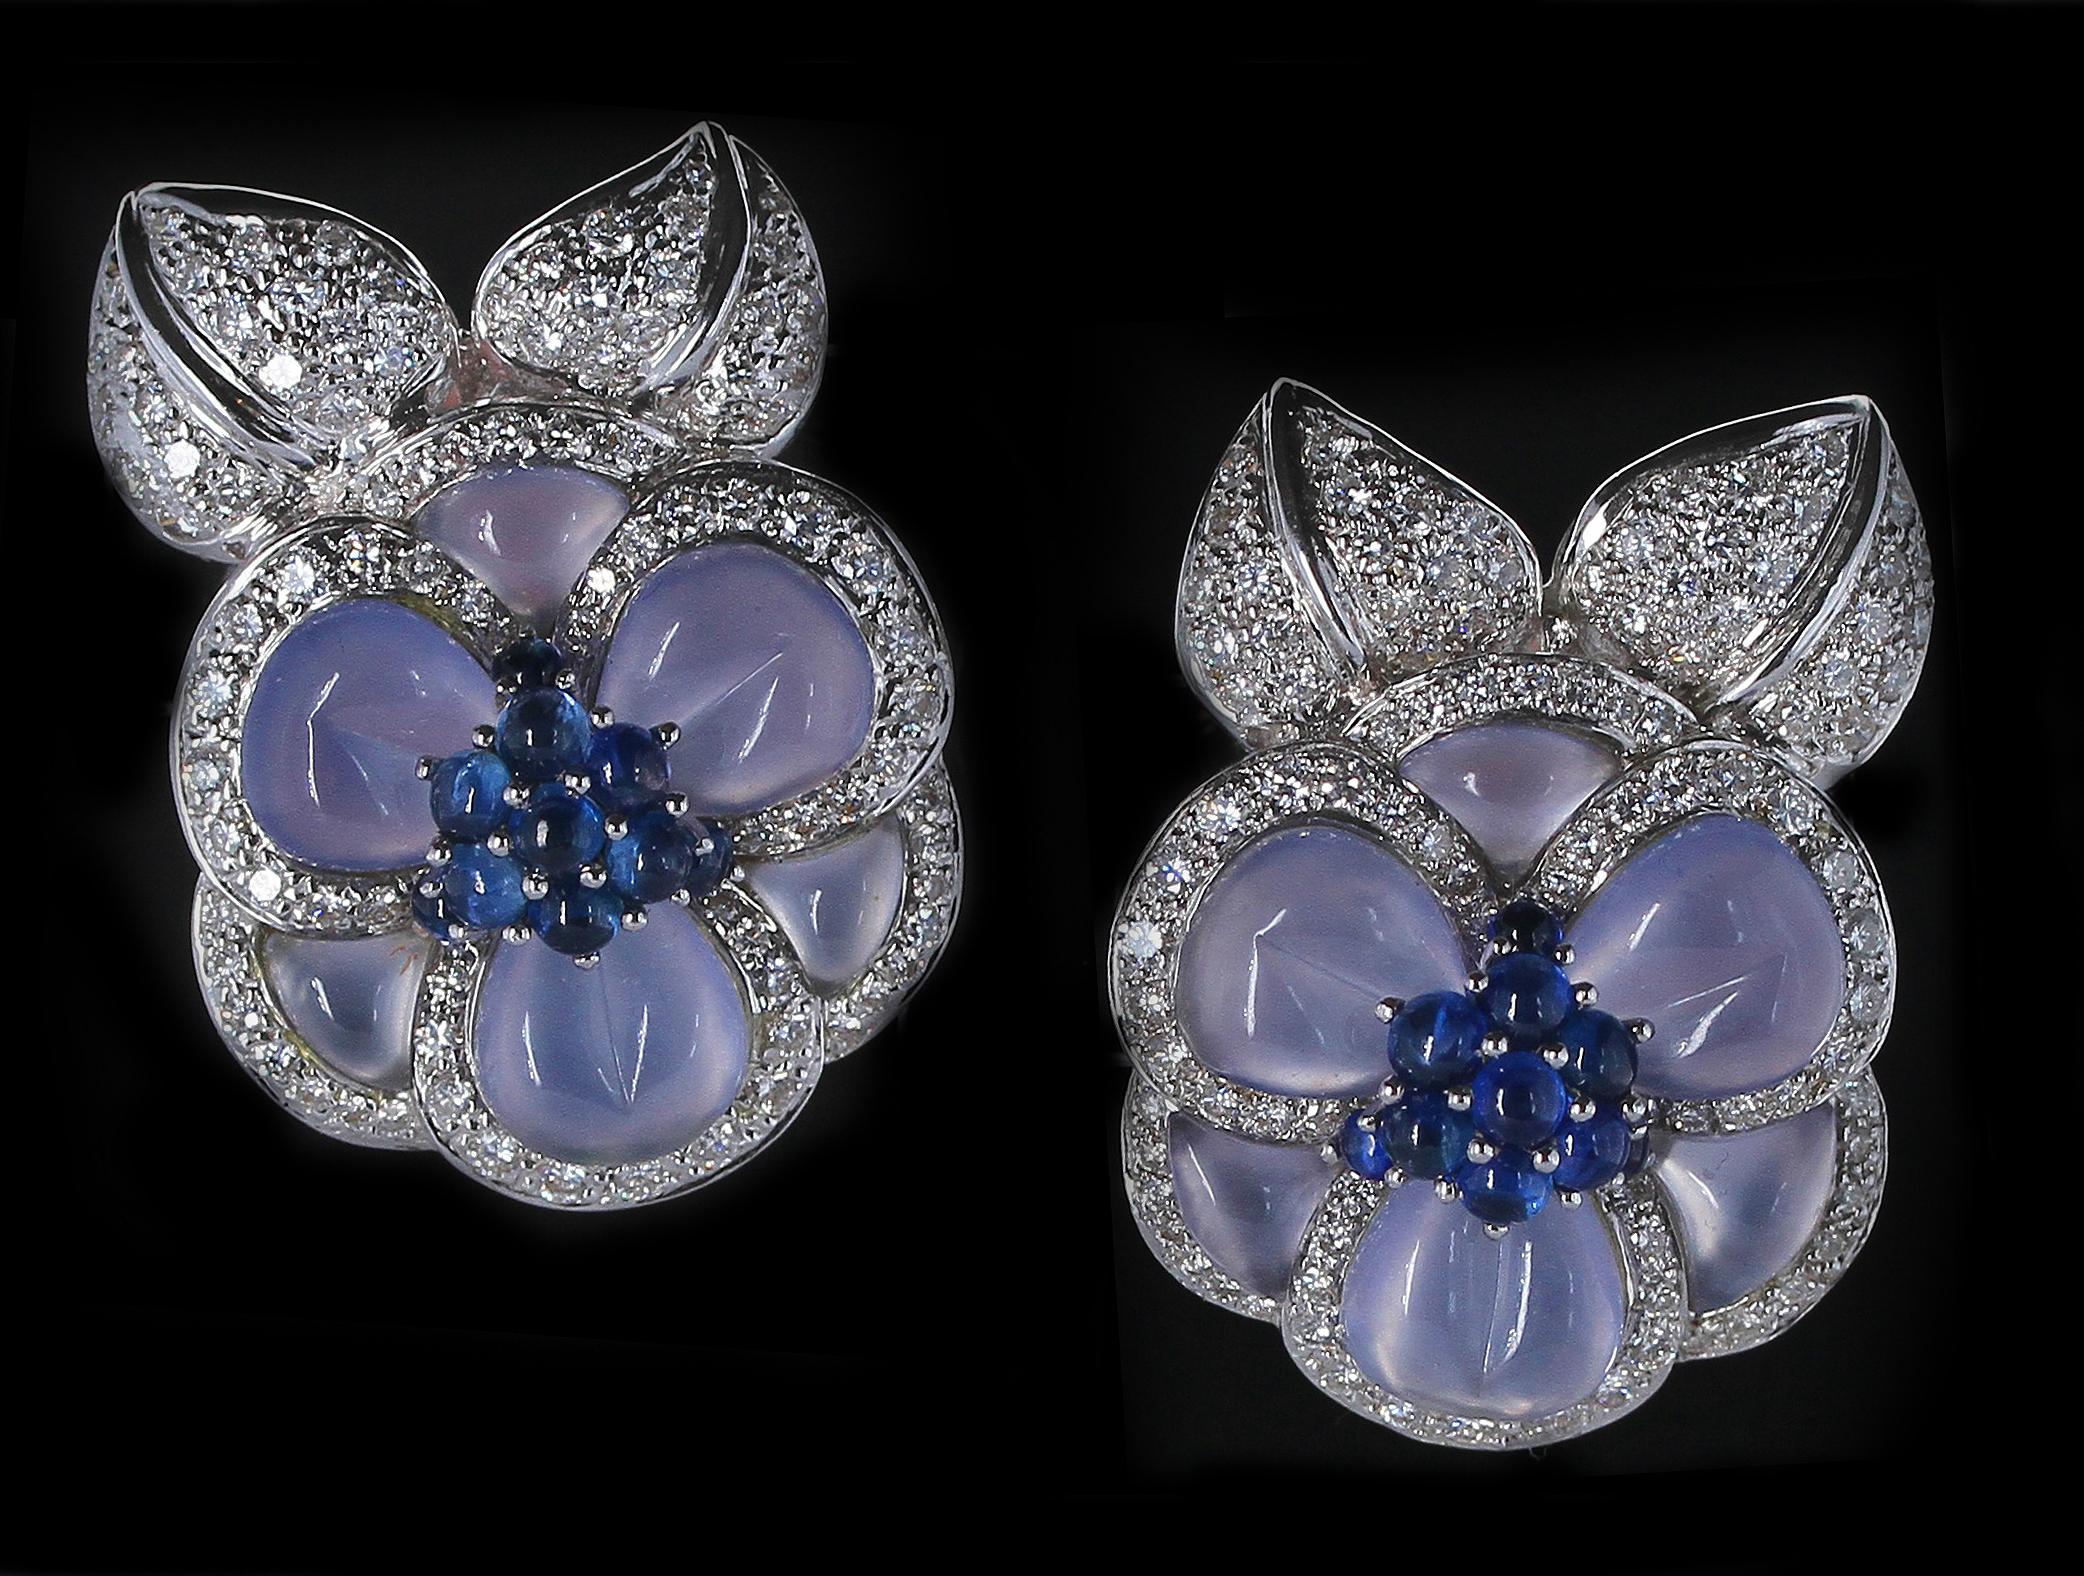 A stunning pair of carved chalcedony earrings accented with sapphire cabochons and diamonds. The chalcedony acts as petals and the sapphire cabochons are the pistil of the flower. The round diamonds are the leaves of the flowers. 18K White Gold. 1